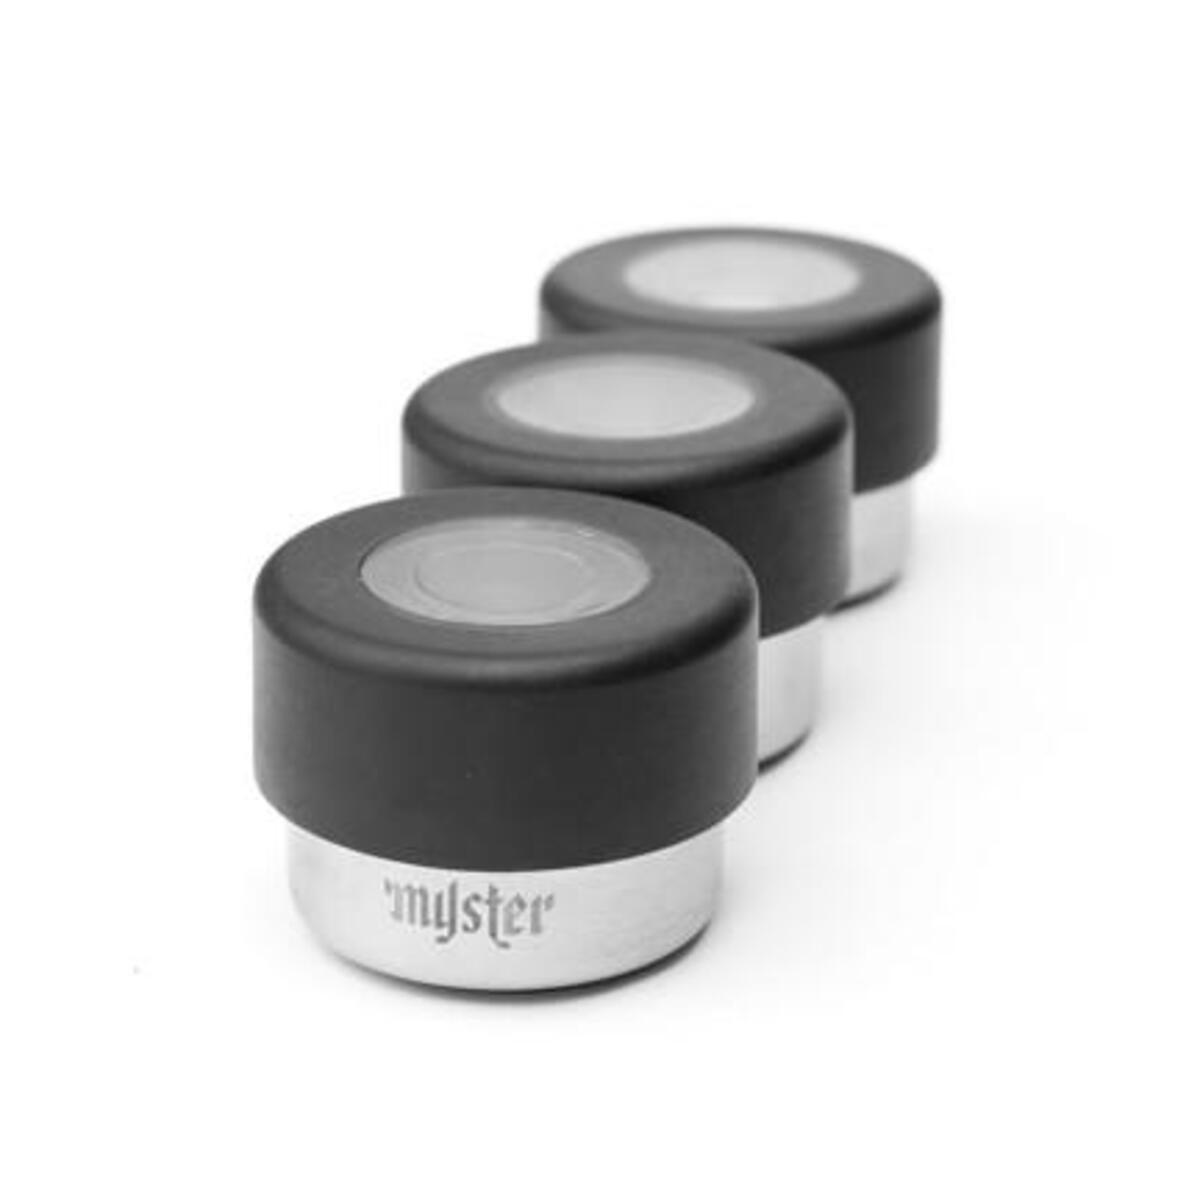 Myster Accessory 3 Pack Myster Magnetic Storage Pods